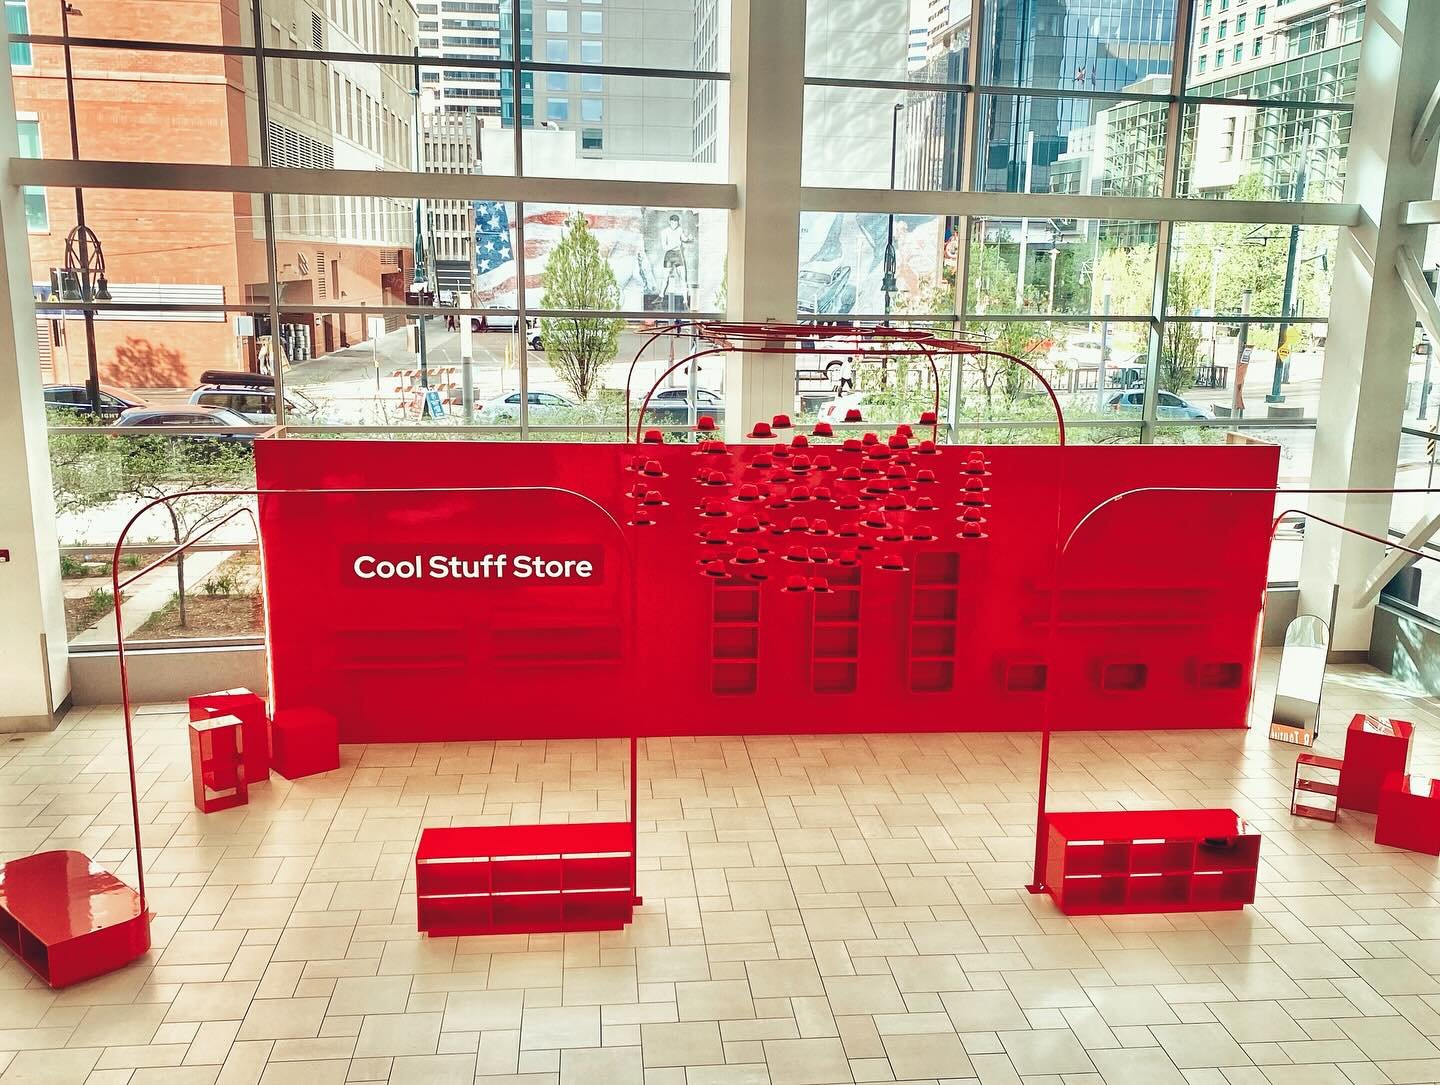 The Cool Stuff Store for @redhatinc